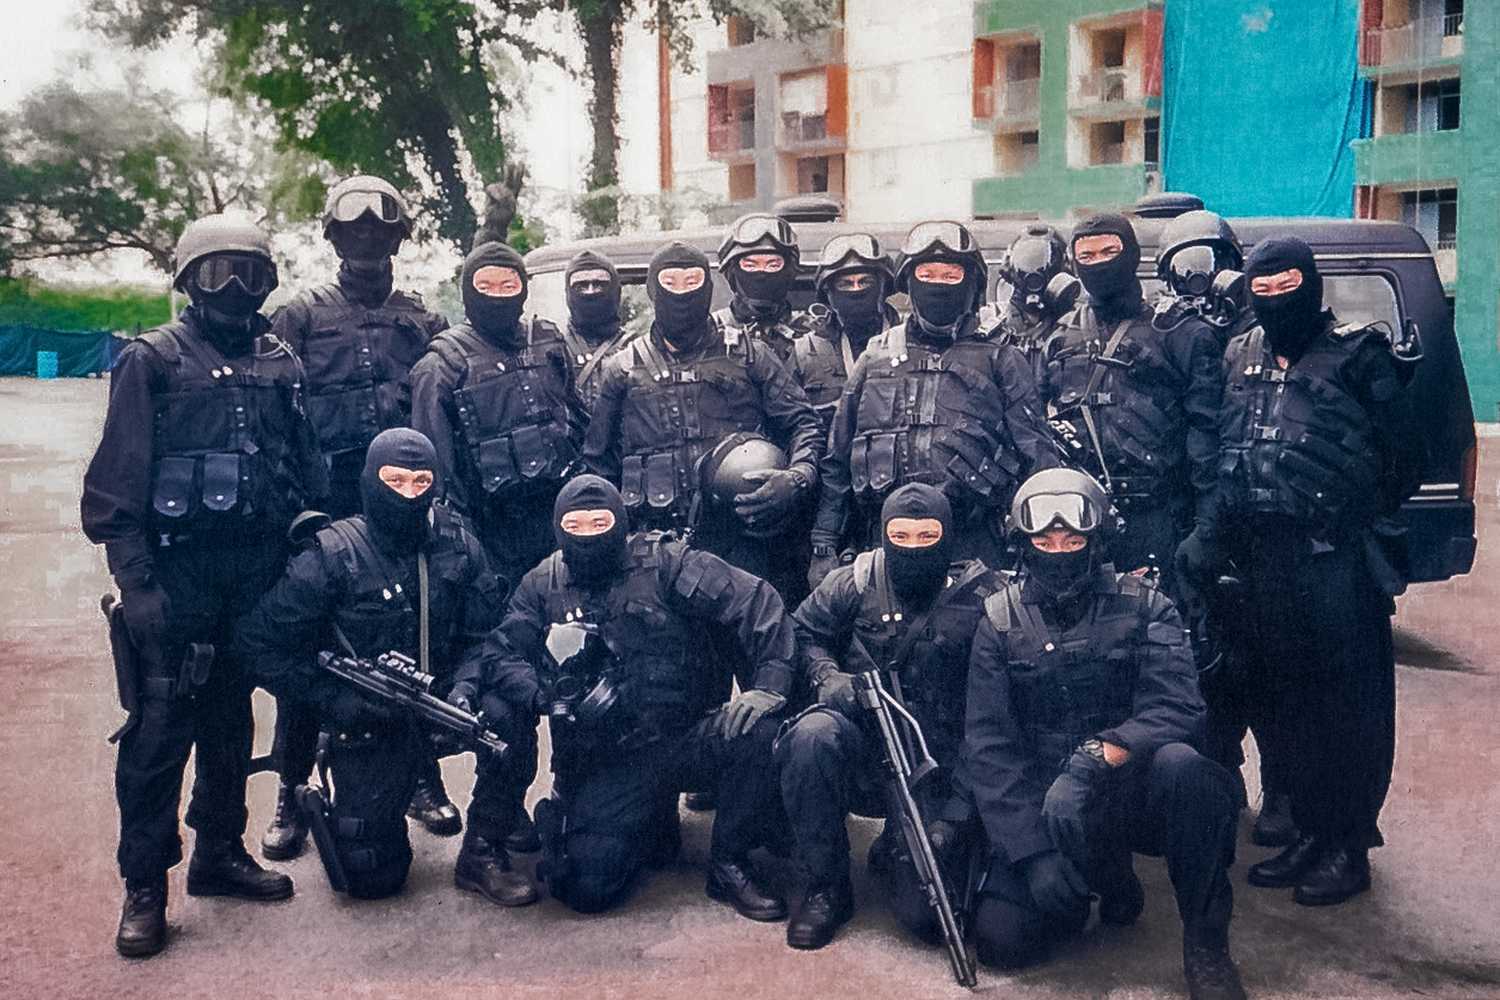 A group of people in black uniforms with headgear and balaclava